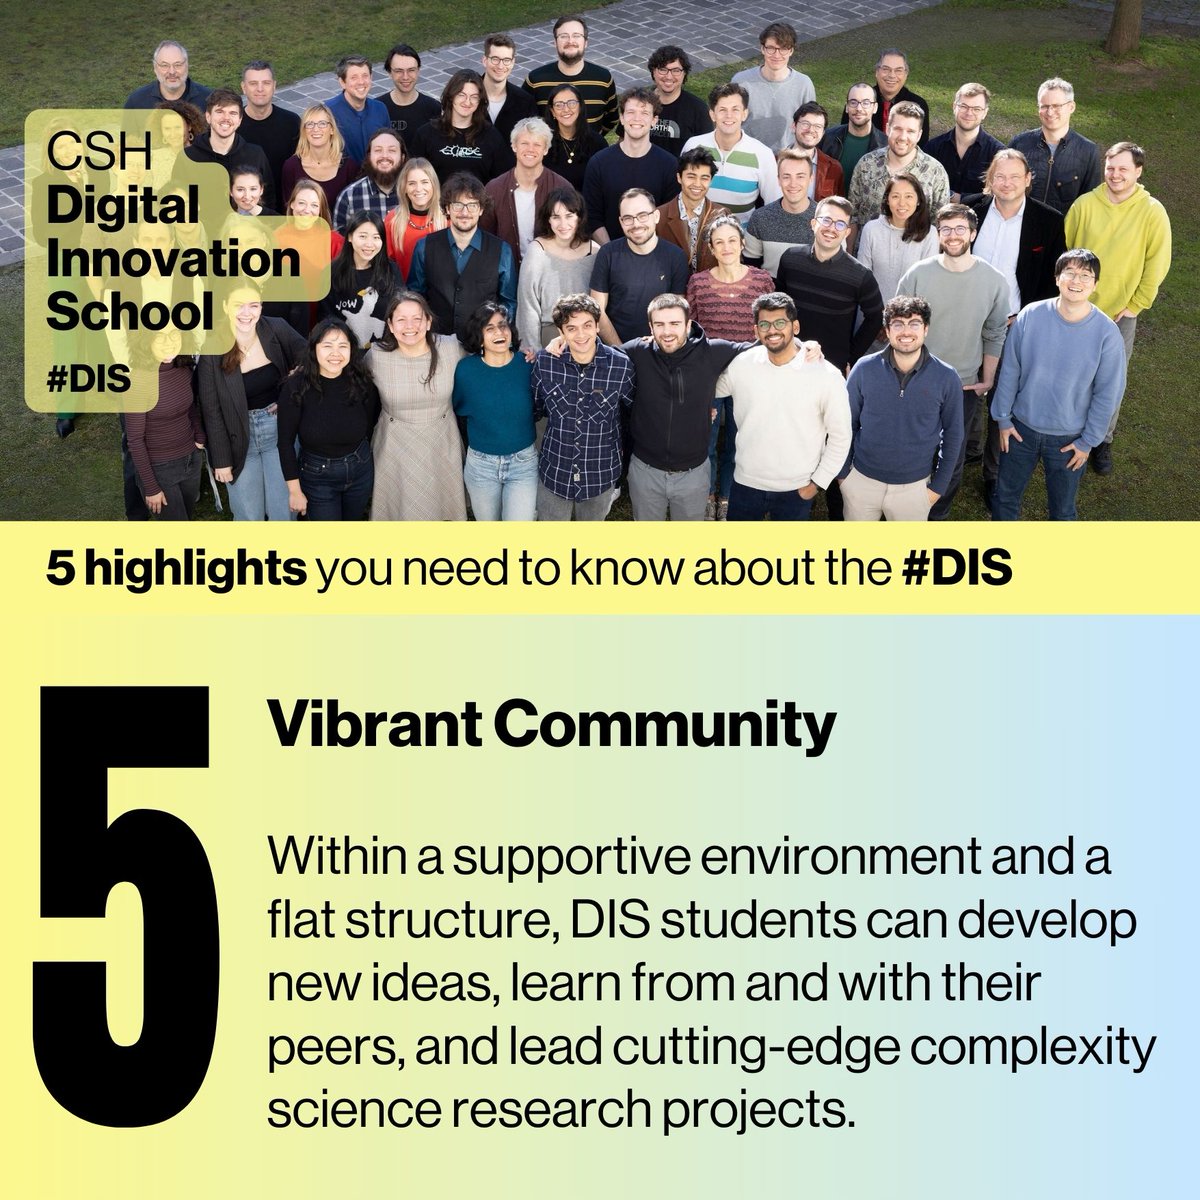 Are you interested in joining our 🐝 vibrant 🐝 research community? Pursuing your #PhD through the CSH Digital Innovation School (#DIS) is a fantastic opportunity to do just that. Explore more highlights of the Graduate Program at @CSHVienna: bit.ly/3JLksko